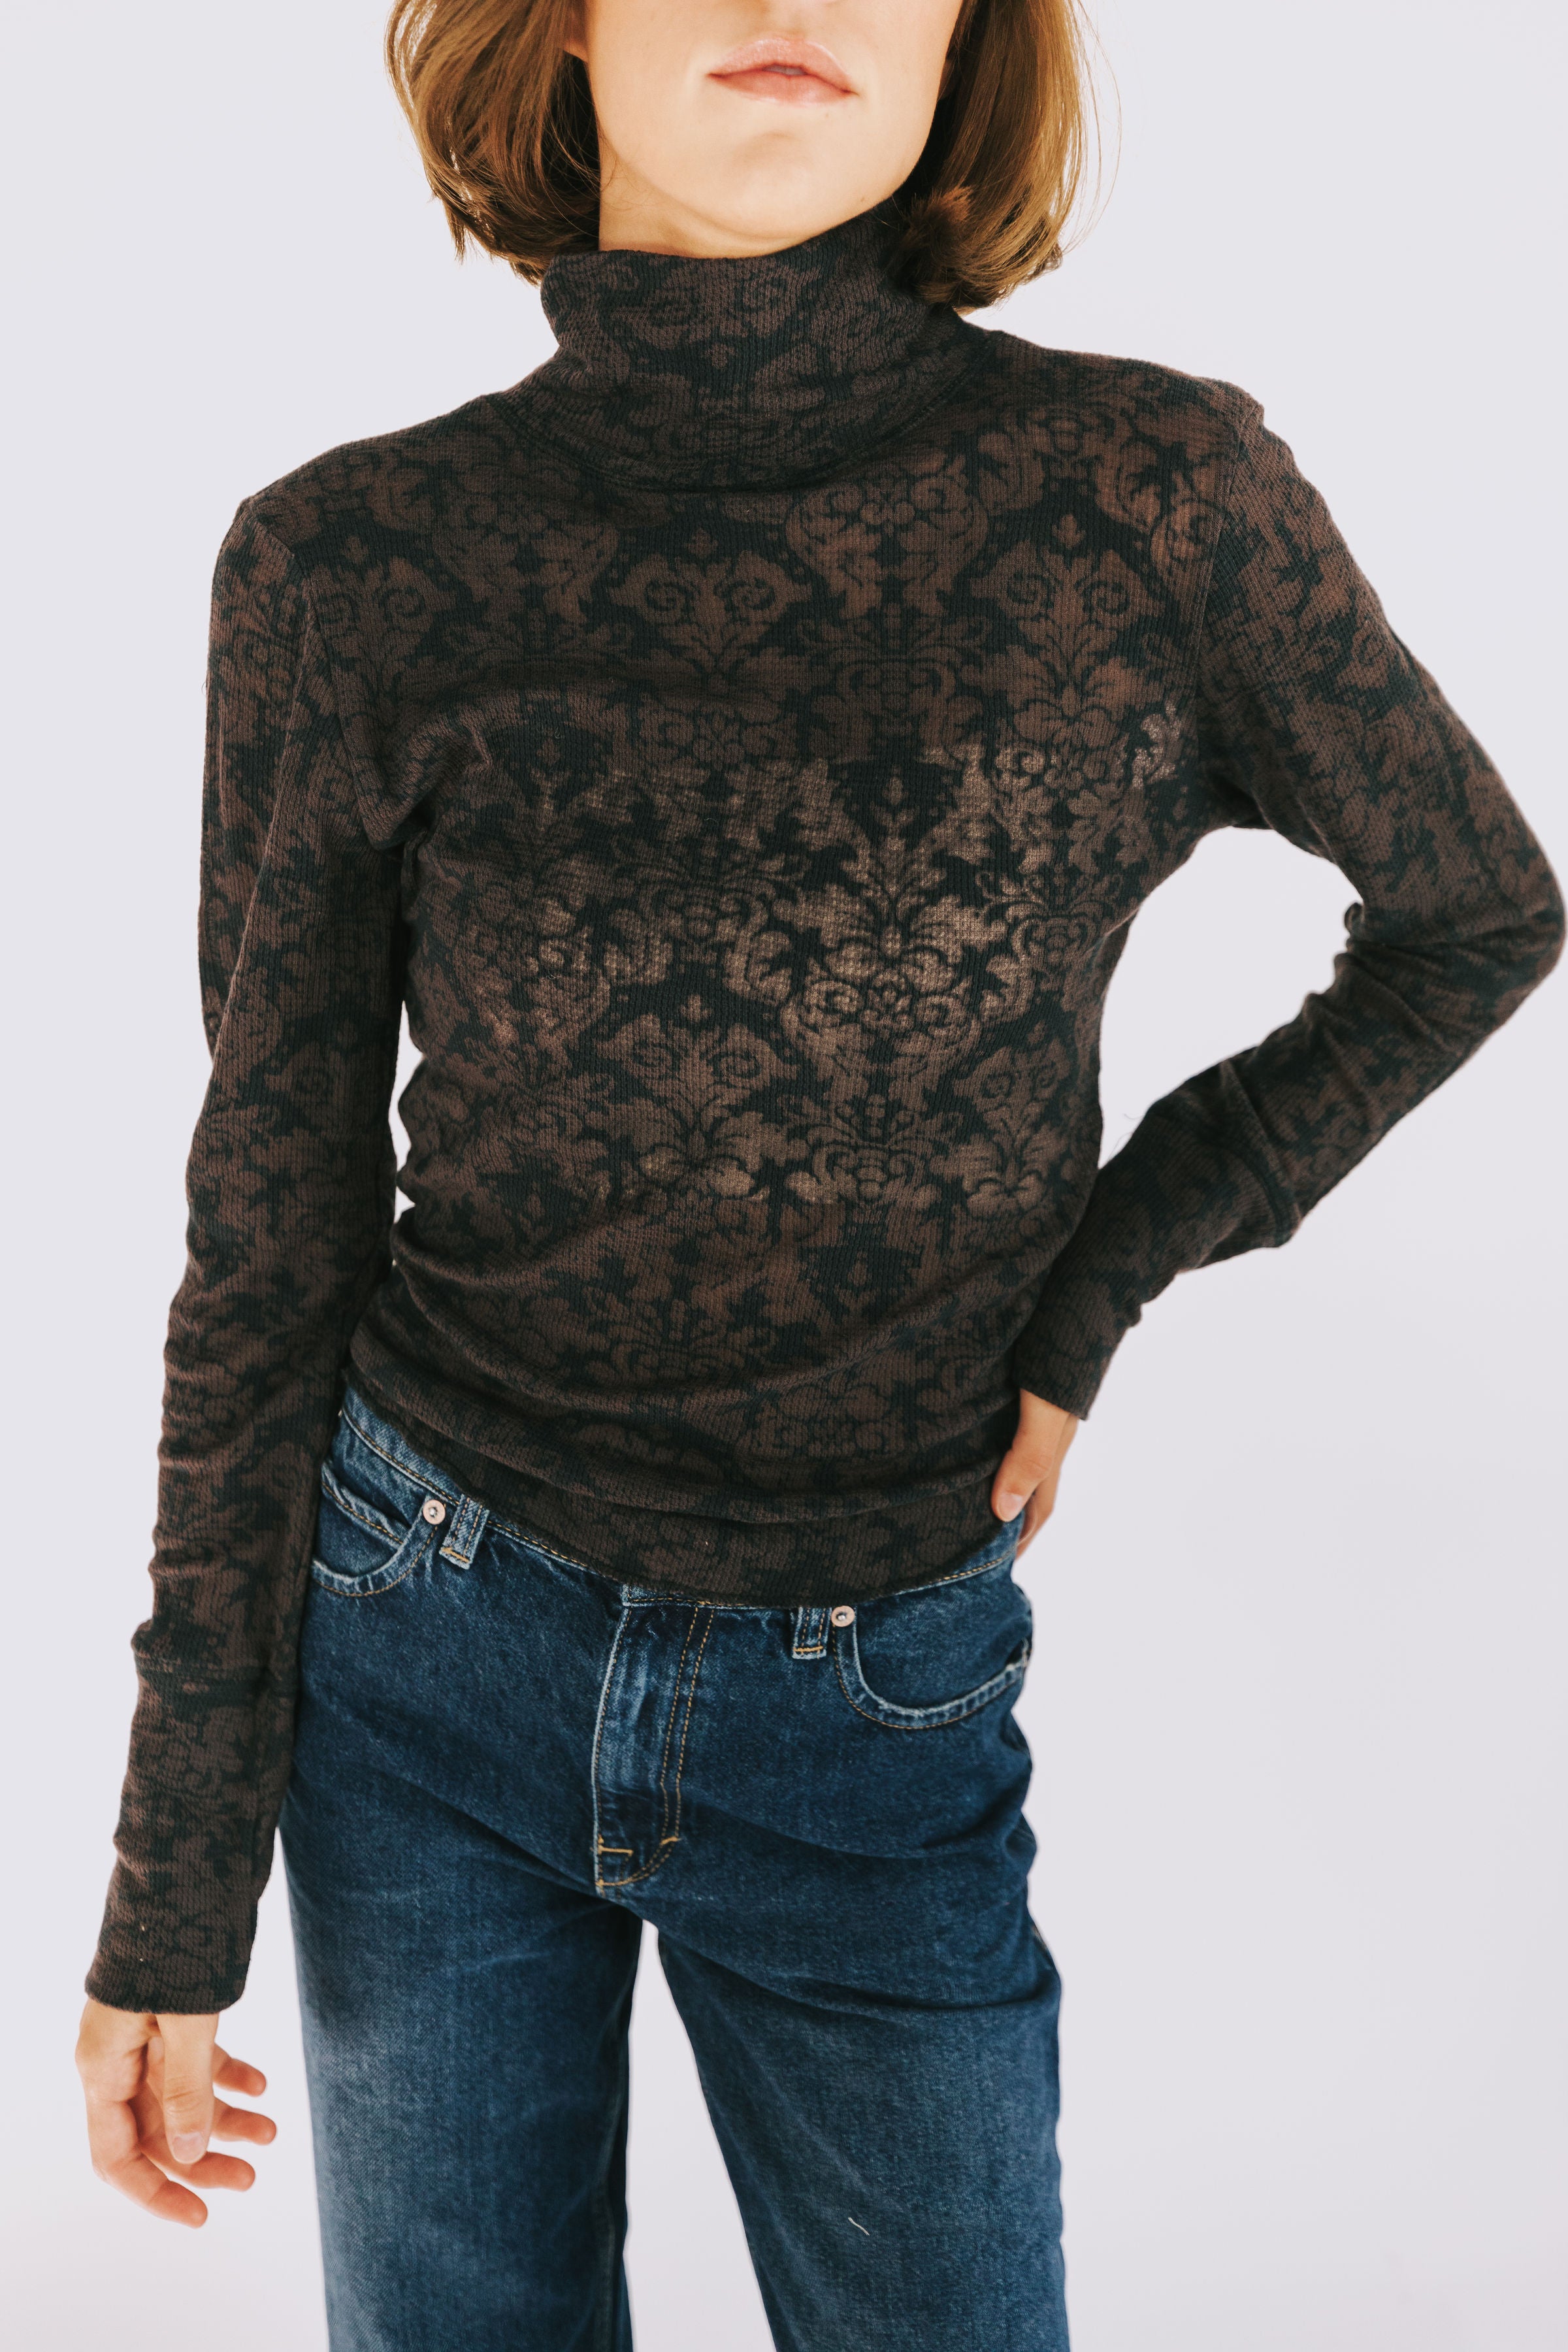 FREE PEOPLE - You And I Long Sleeve Top